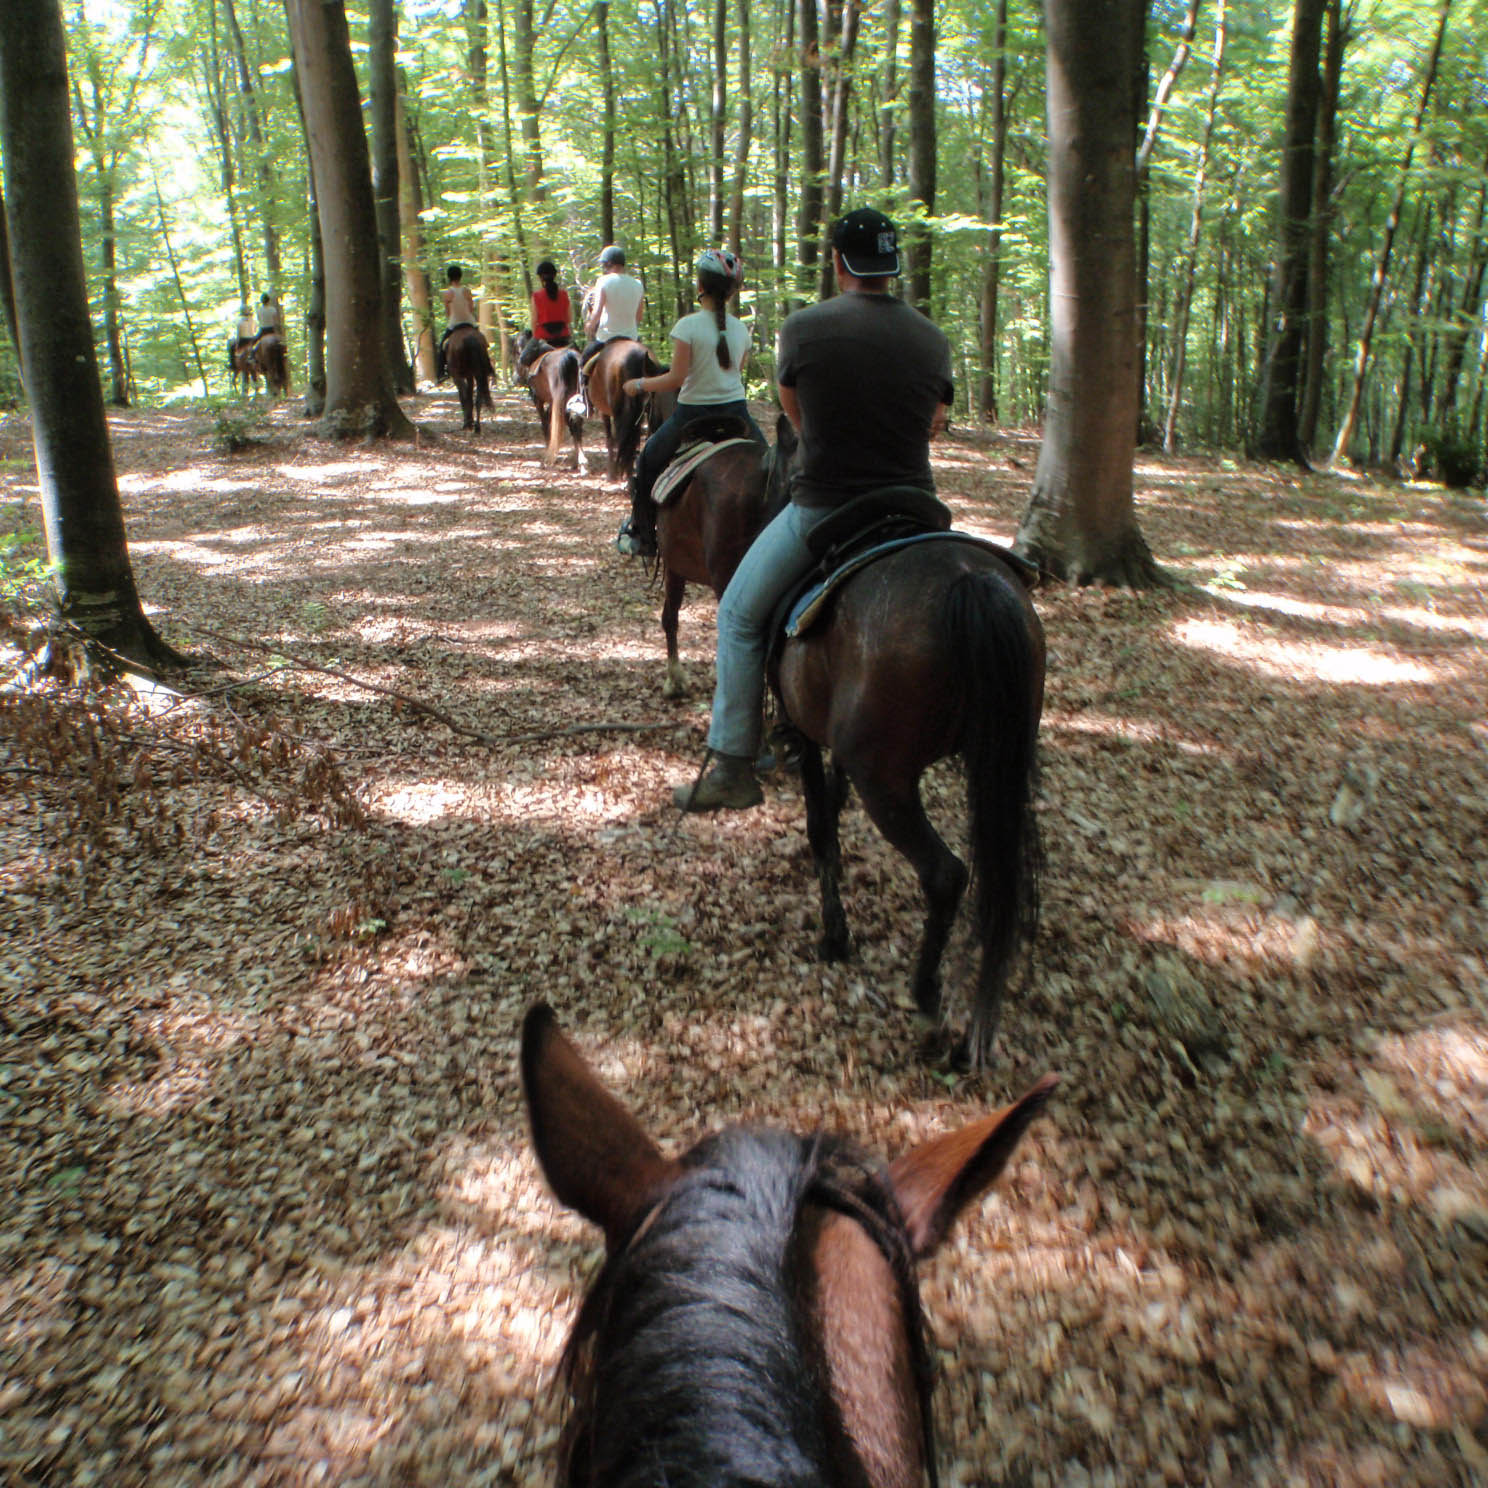 People on a trail ride through woods.